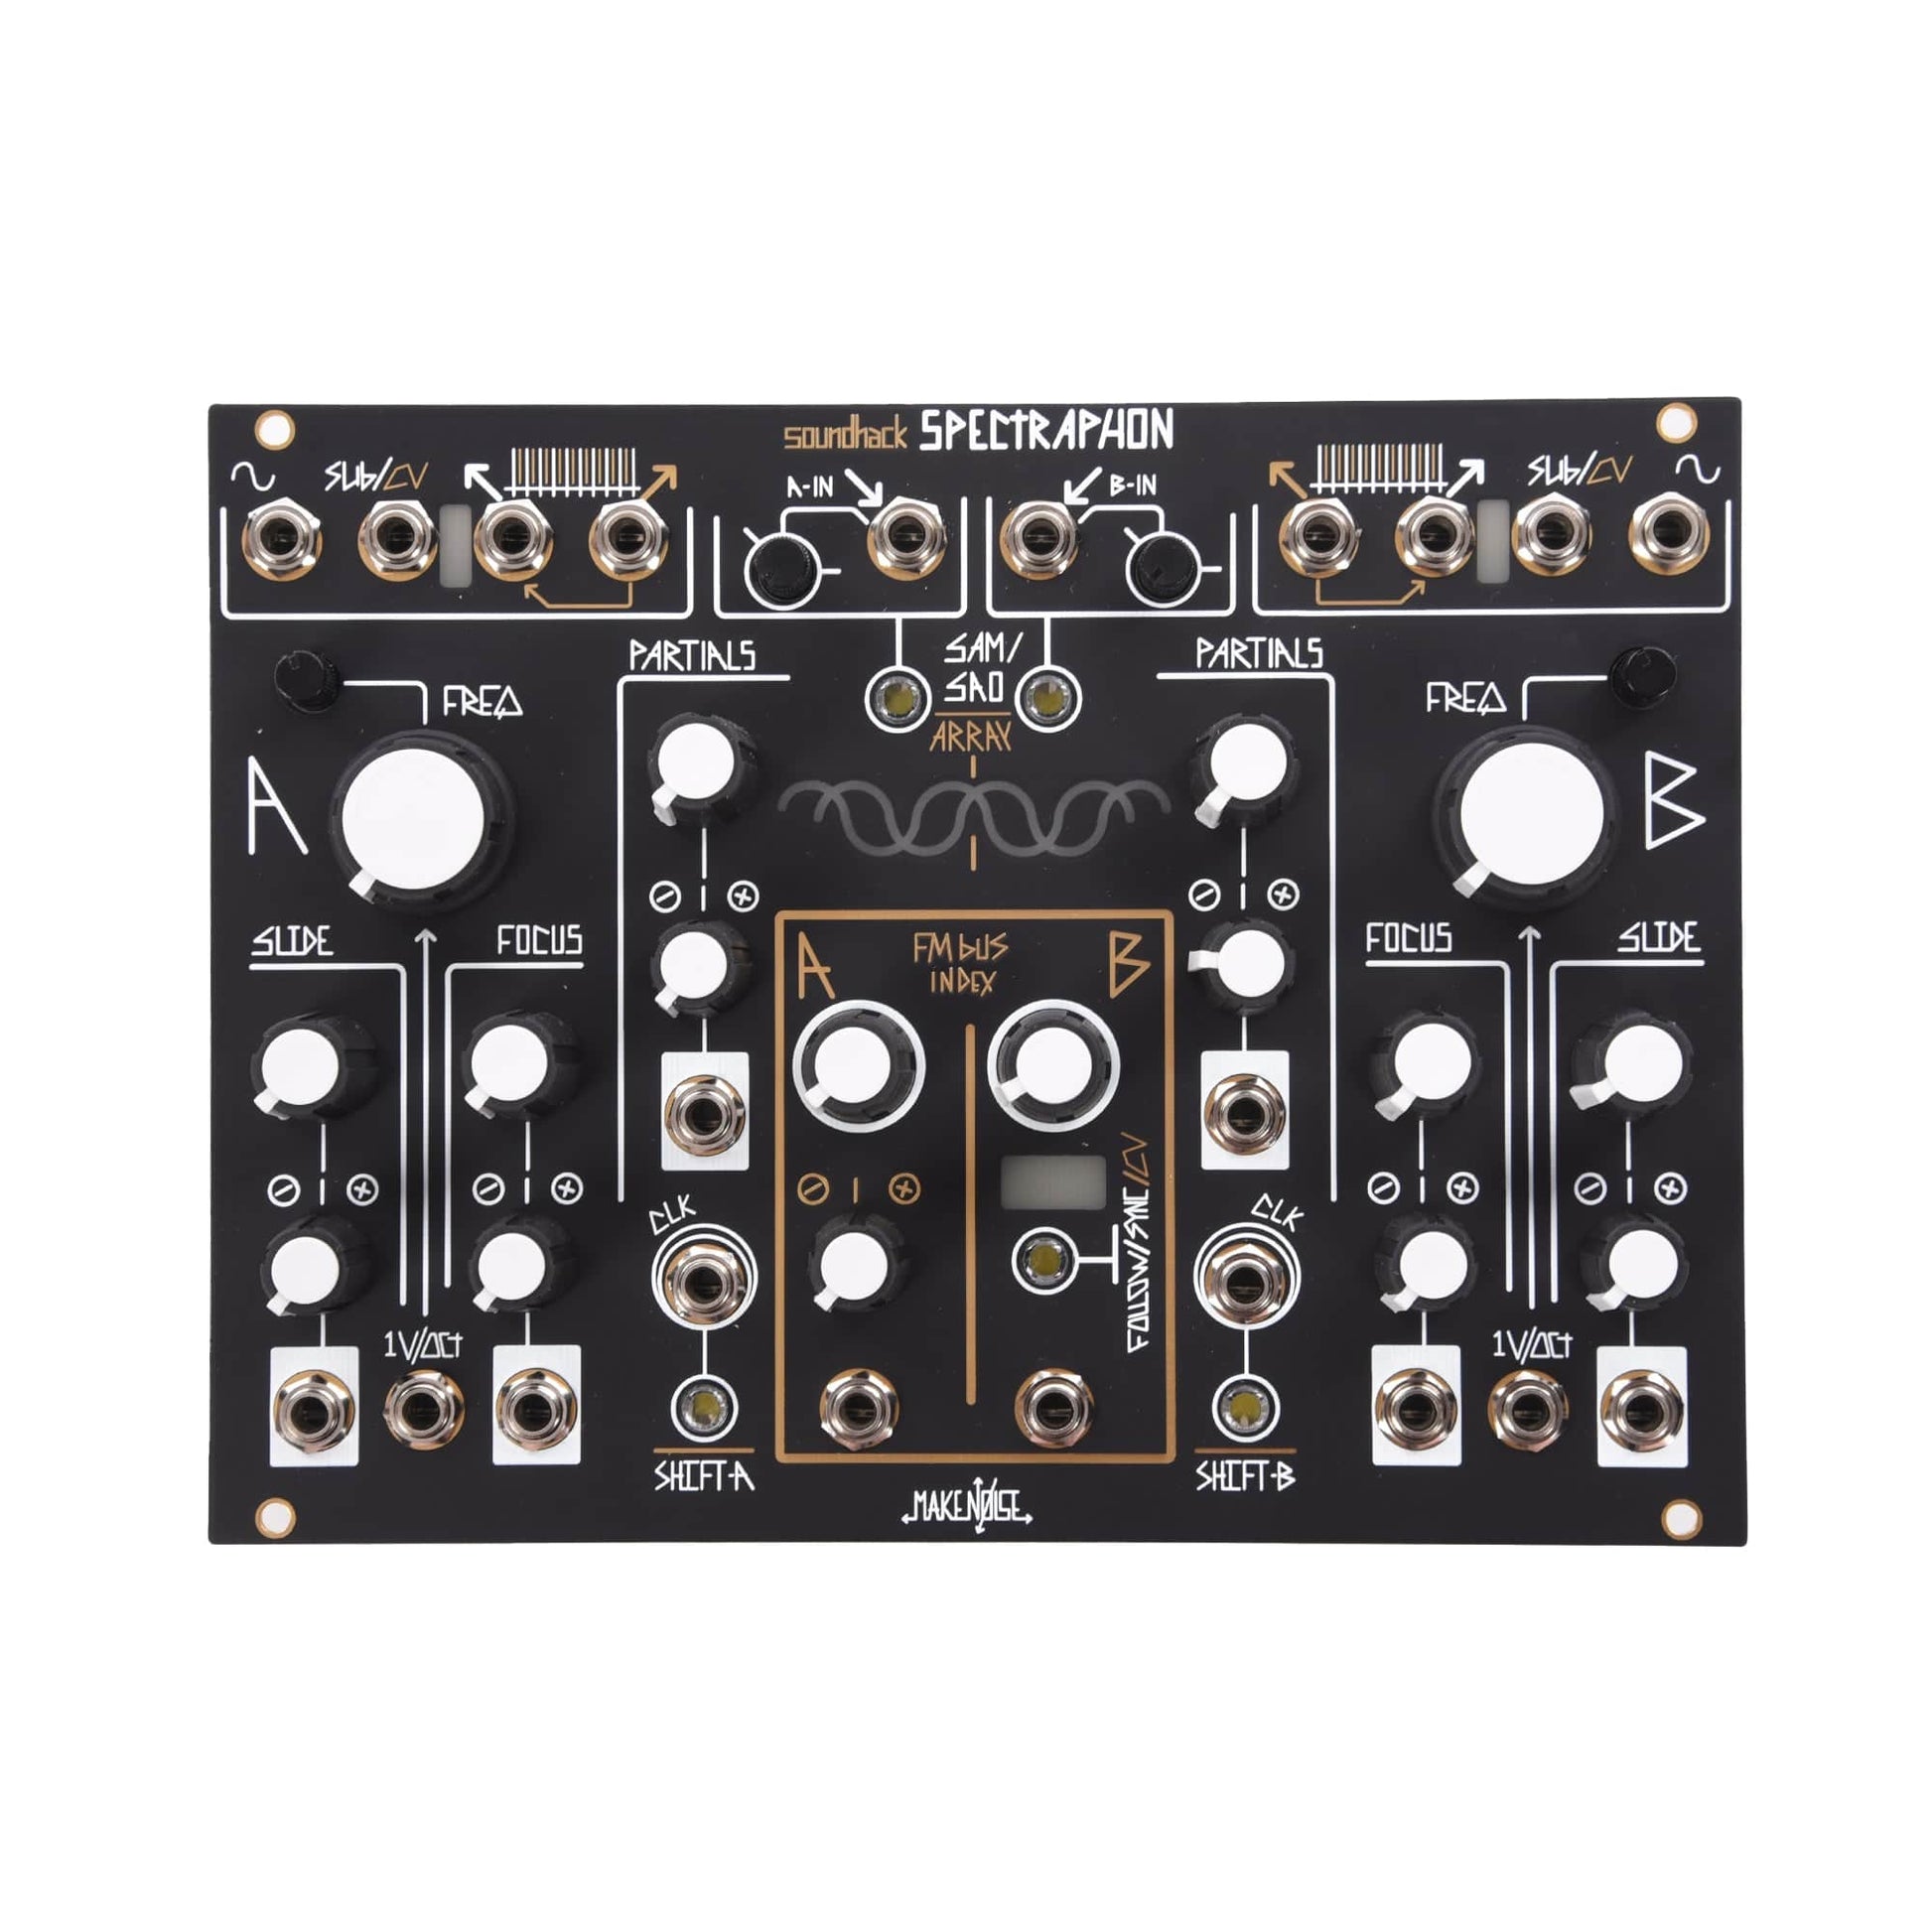 Make Noise Spectraphon Dual Spectral Oscillator Eurorack Module Keyboards and Synths / Synths / Eurorack